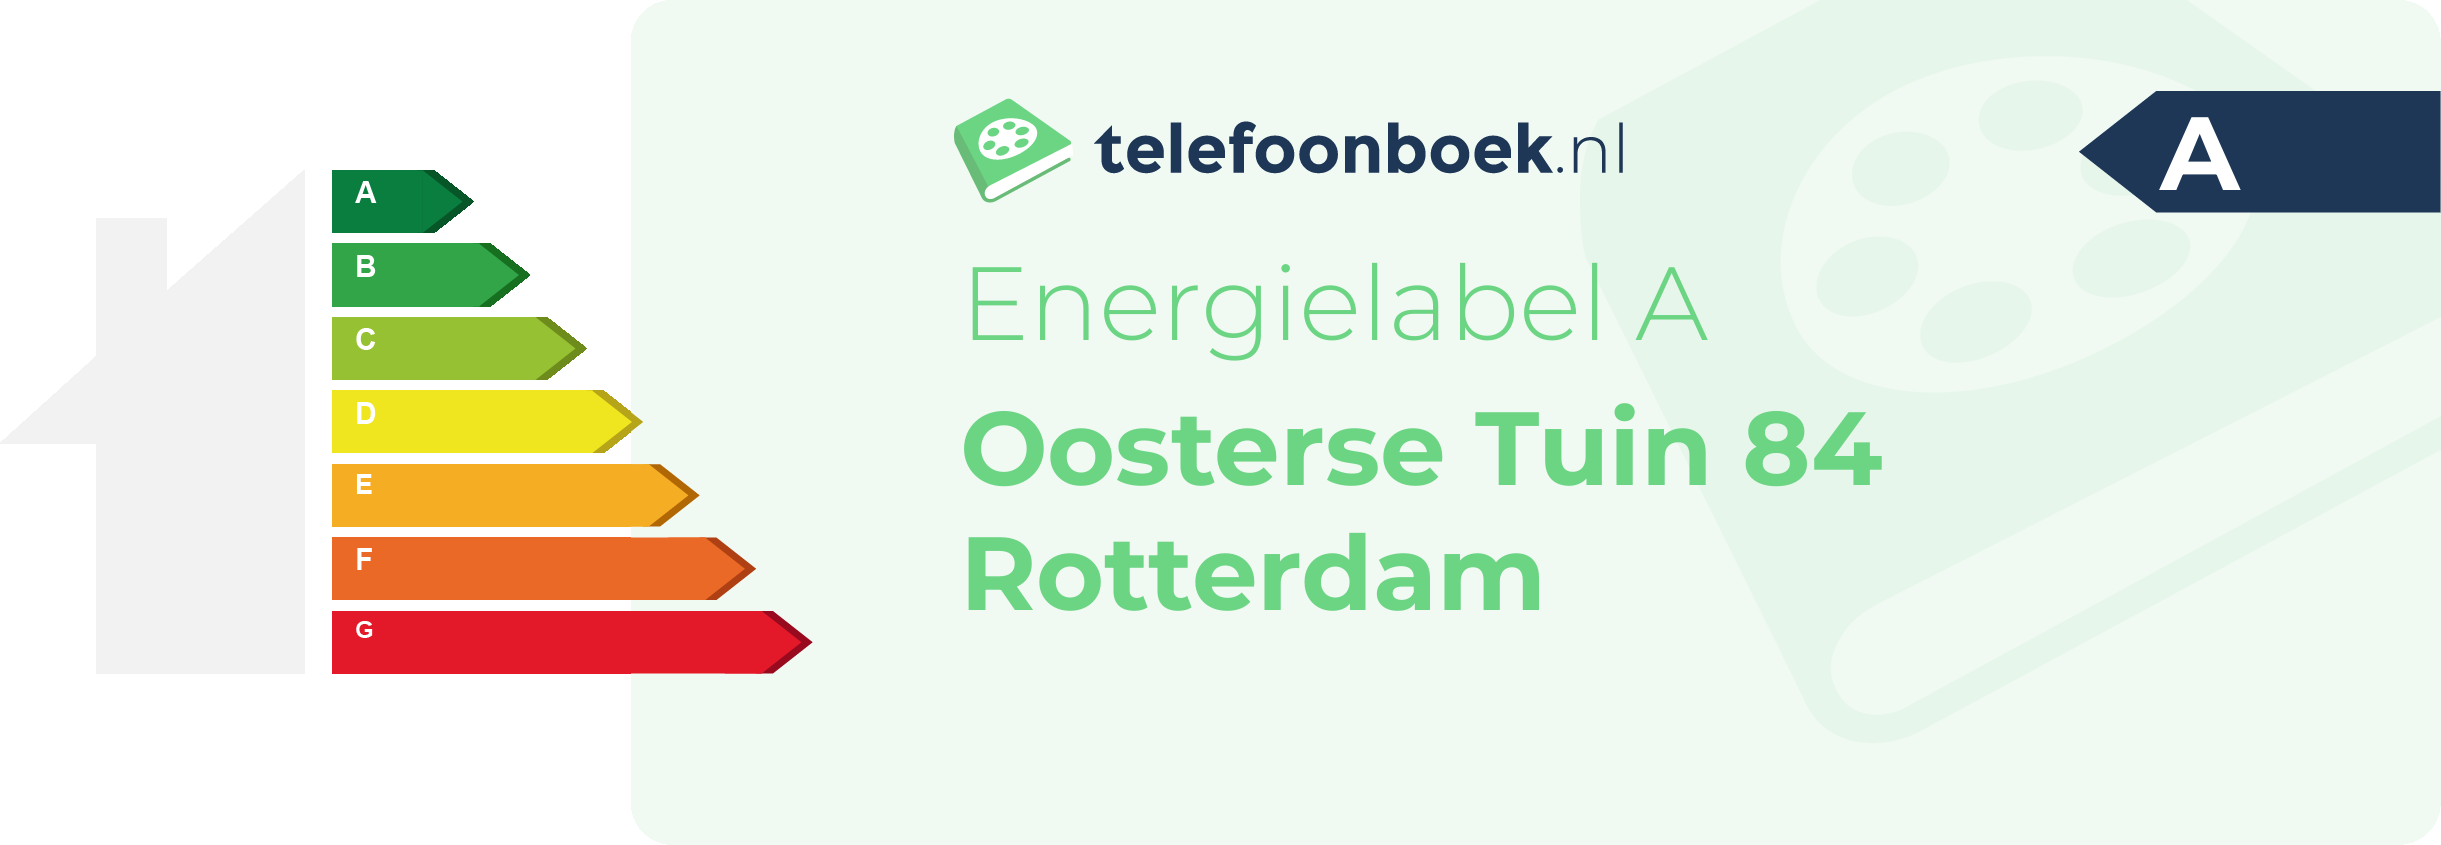 Energielabel Oosterse Tuin 84 Rotterdam